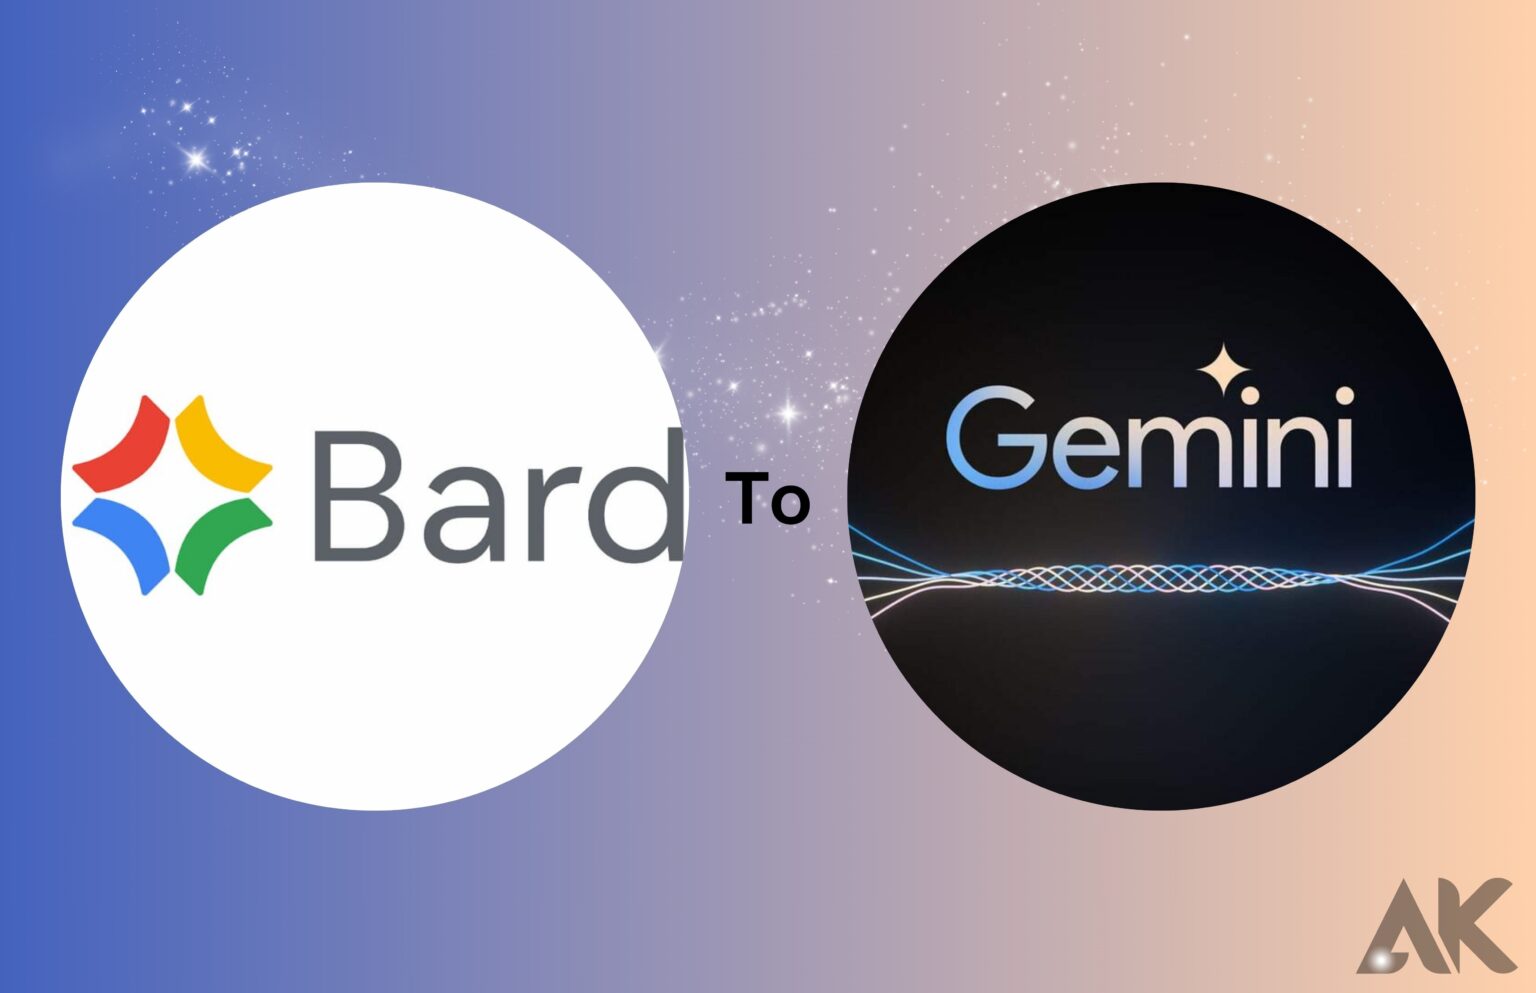 From Bard to Gemini Google's AI Gets a Makeover!